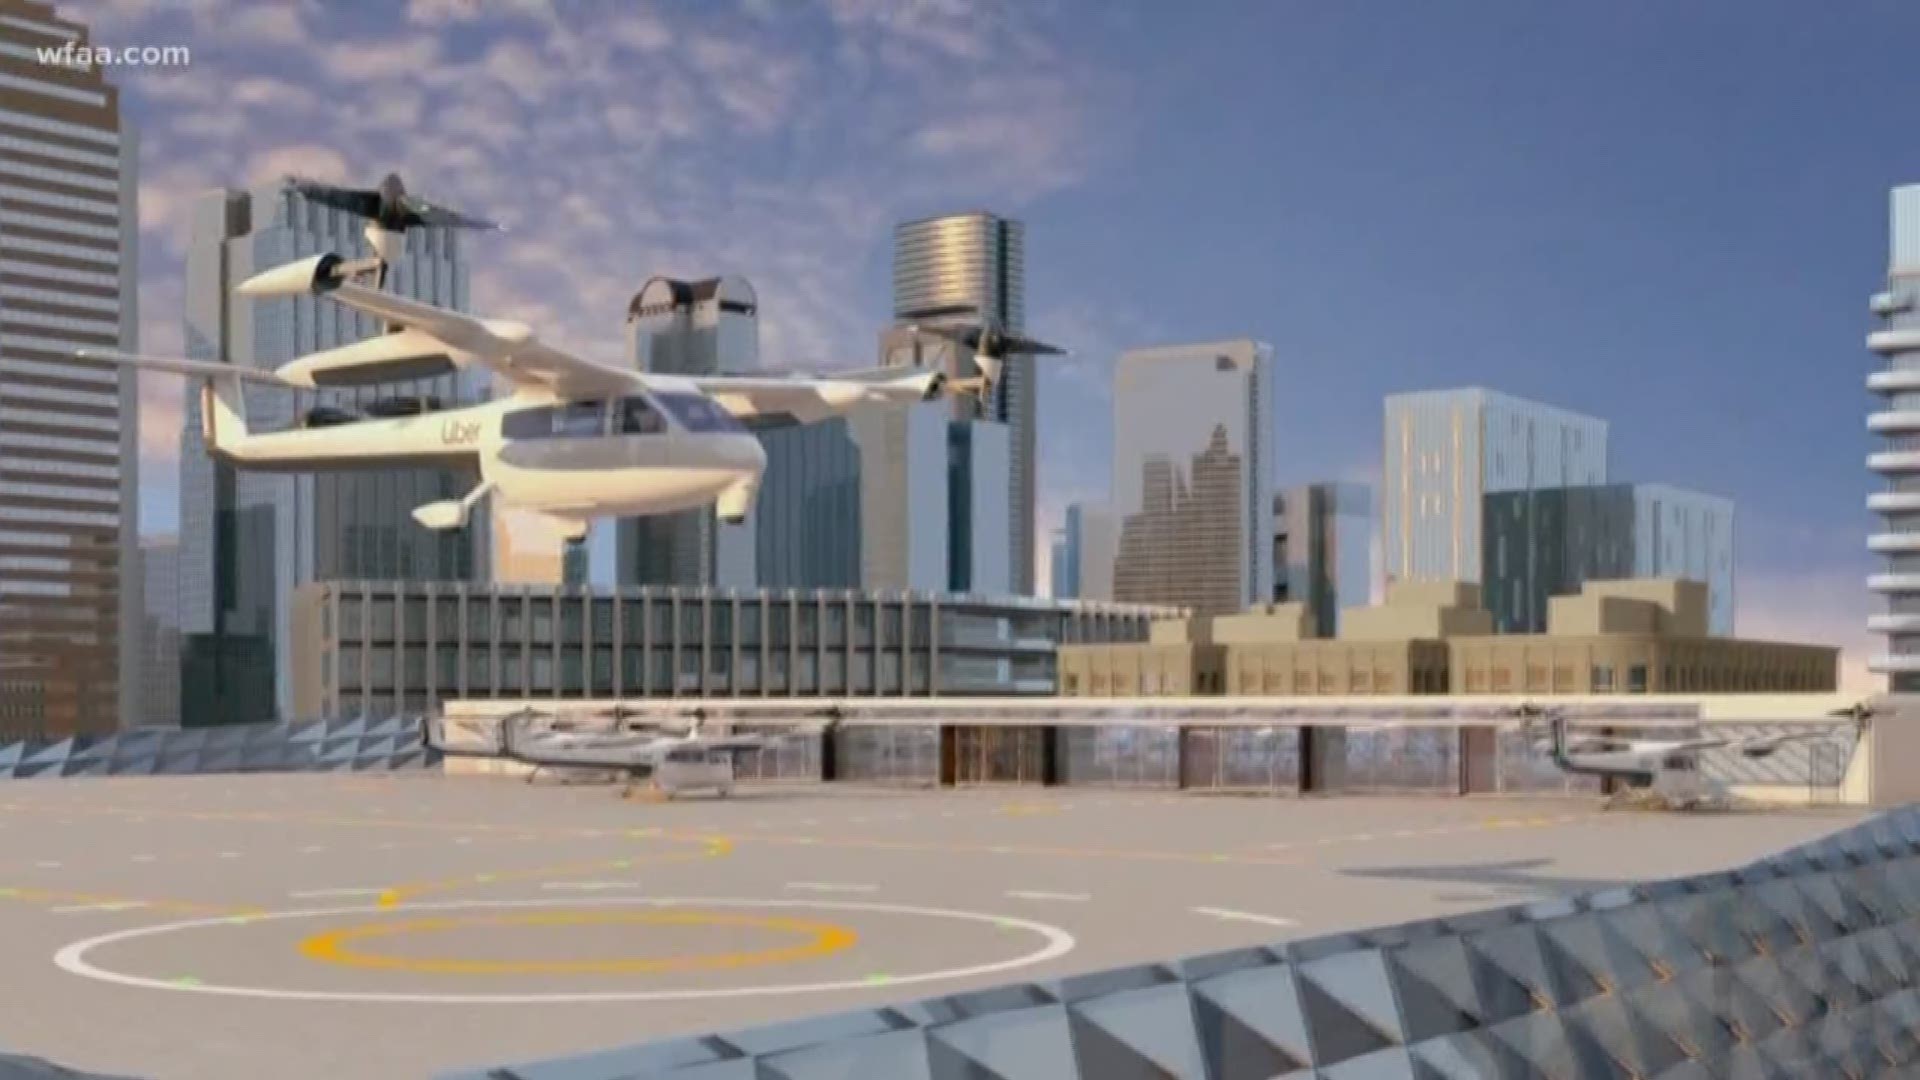 The future of transportation just might be taking shape in Frisco. At Frisco Station a helipad was just built to be the first test site for Uber Elevate. The helipad sits right next to The Star and along the Dallas North Tollway. It is larger than most helipads because it is designed to handle more than a regular helicopter.